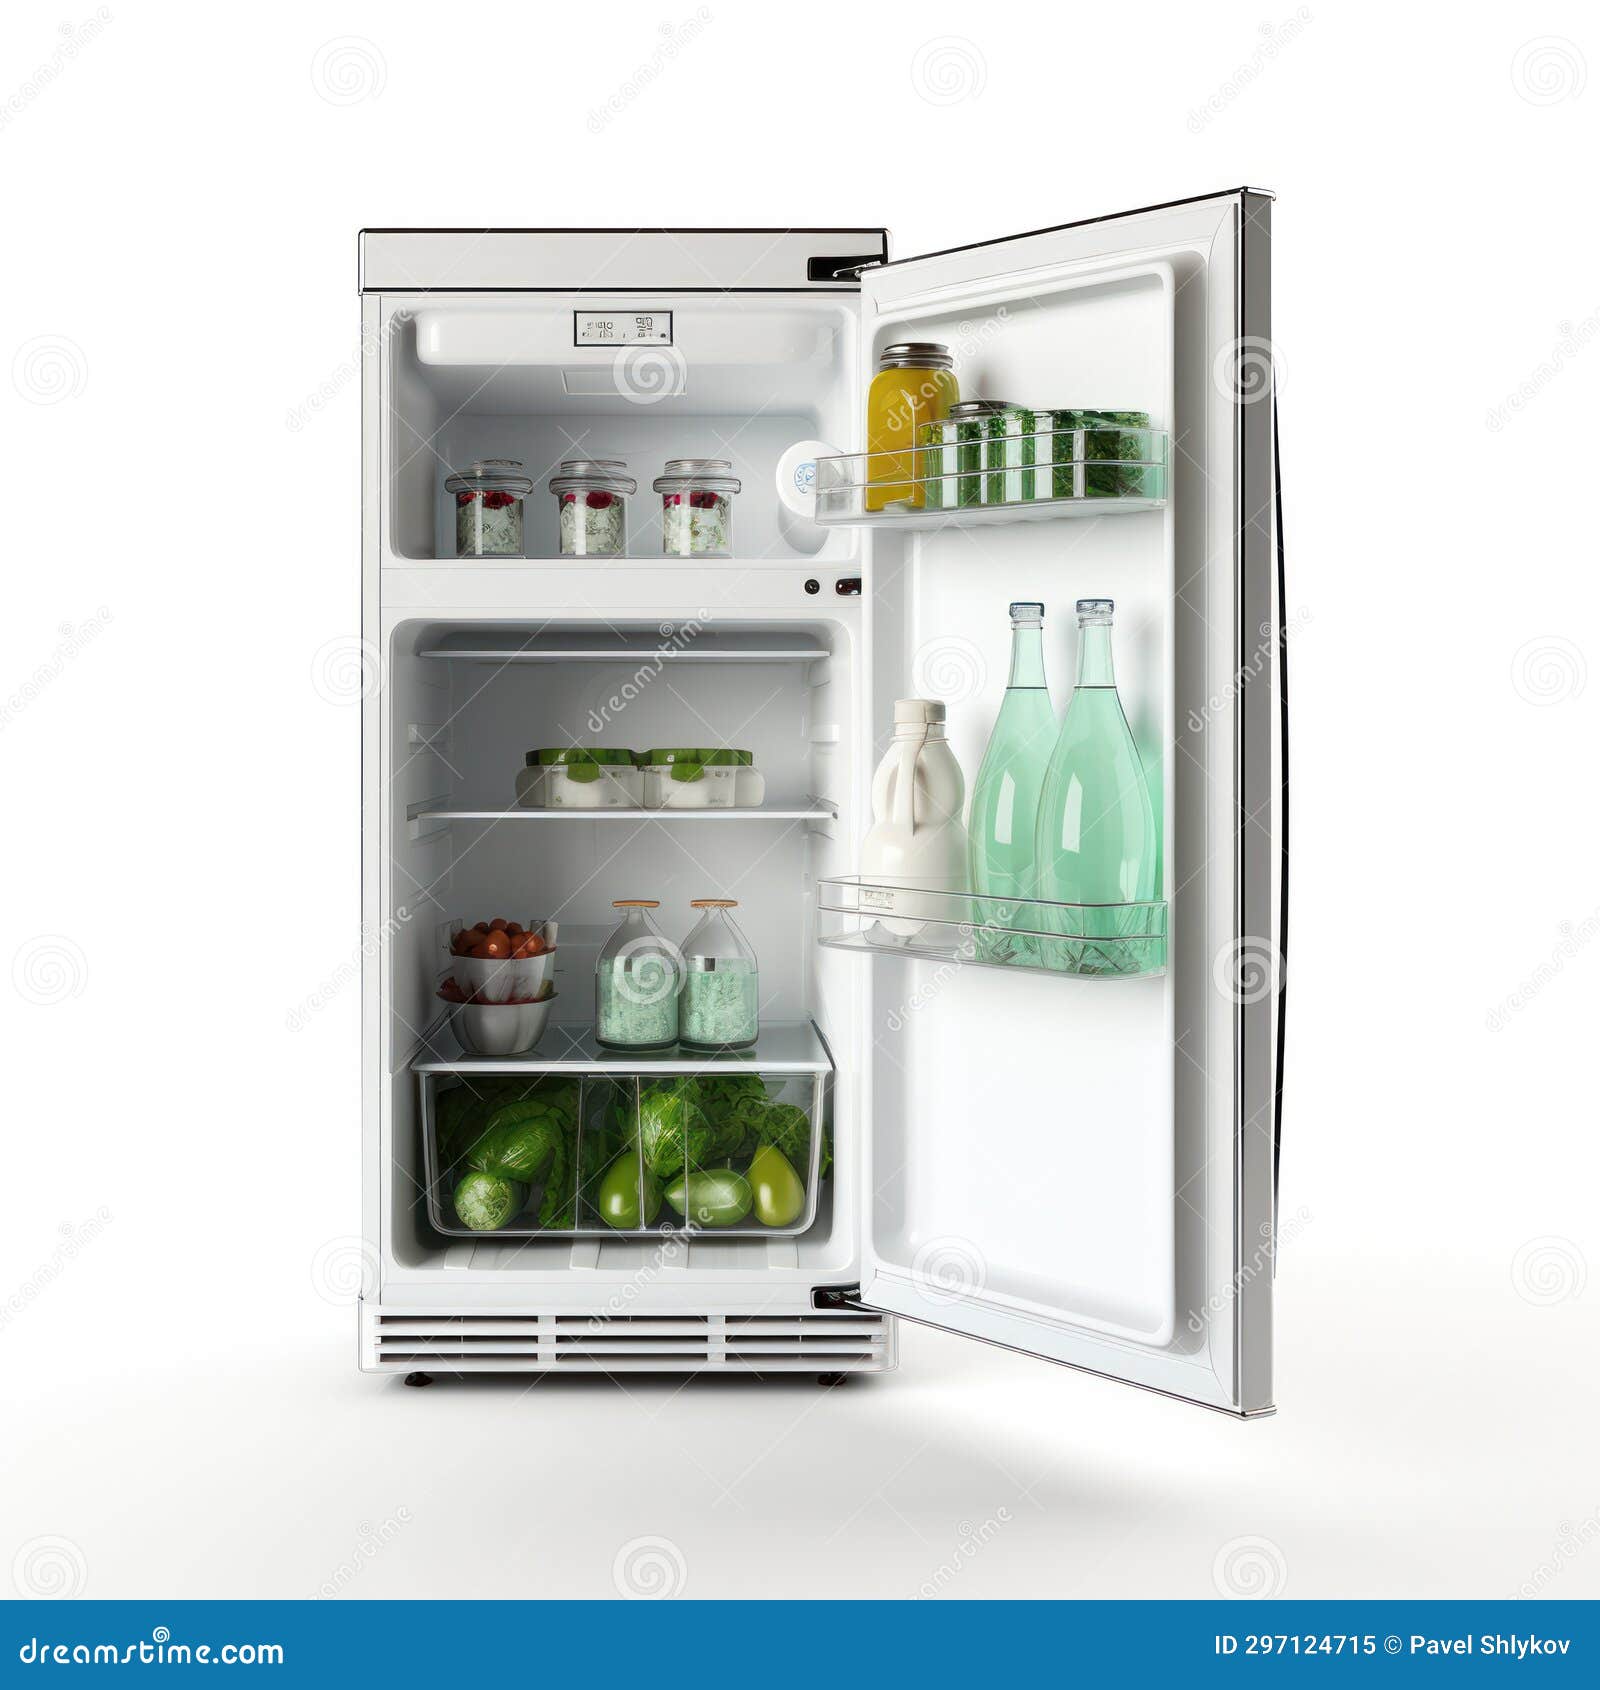 https://thumbs.dreamstime.com/z/studio-shot-open-fridge-full-healthy-food-products-isolated-white-background-297124715.jpg